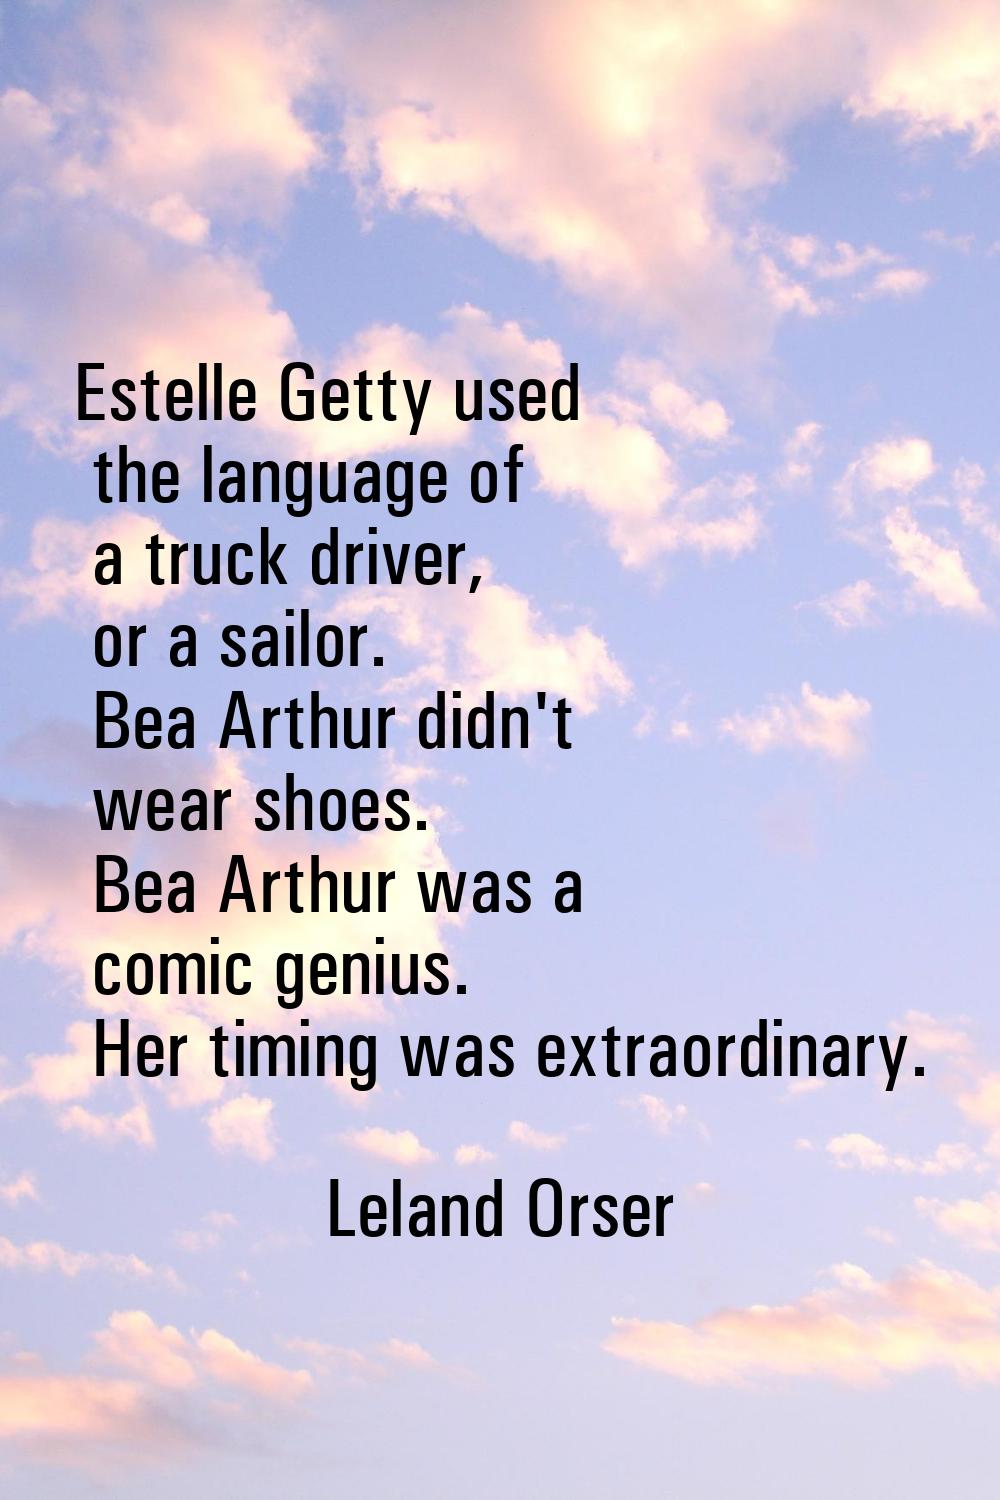 Estelle Getty used the language of a truck driver, or a sailor. Bea Arthur didn't wear shoes. Bea A